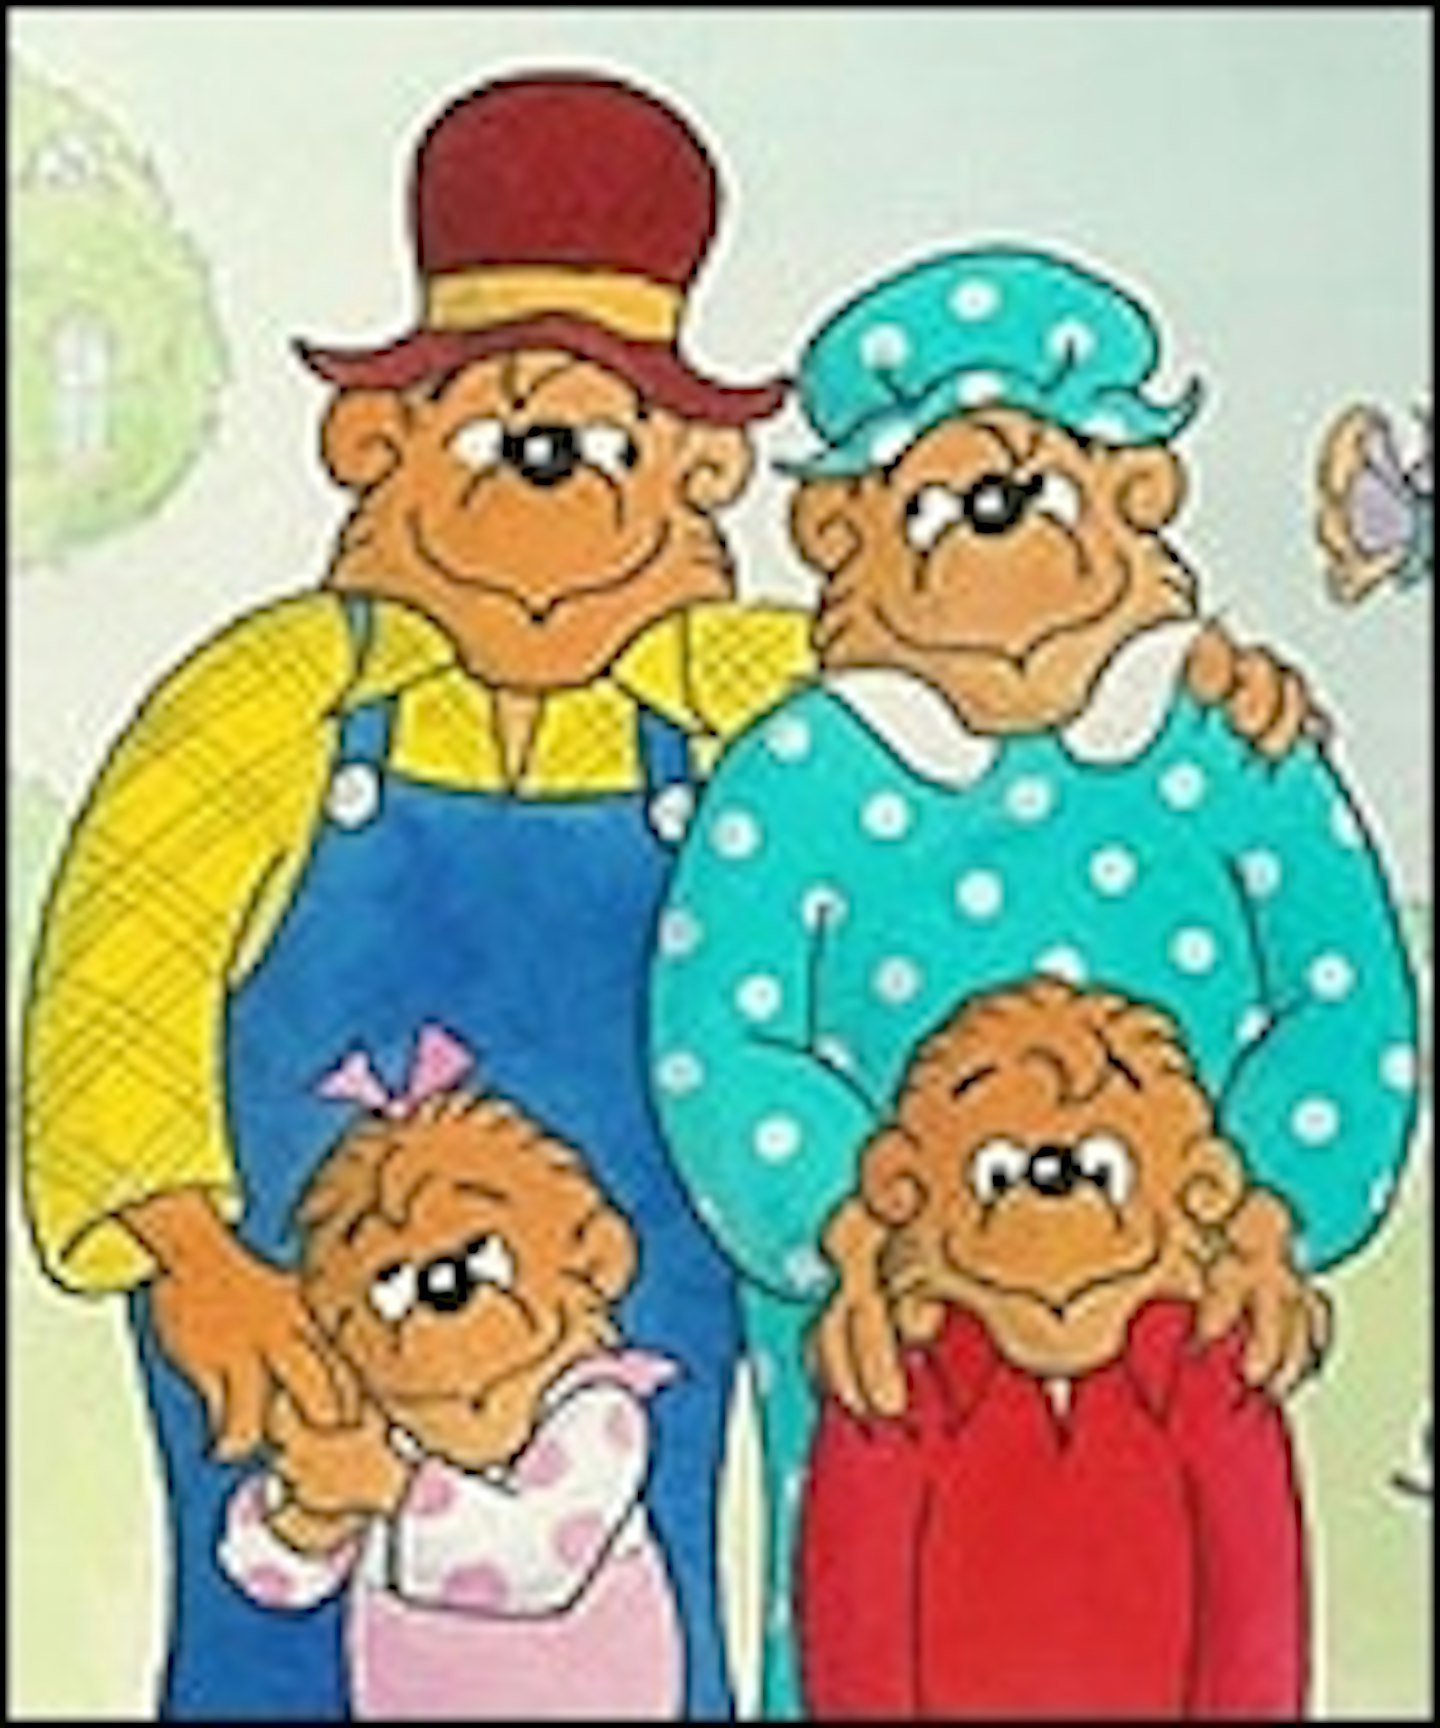 Berenstain Bears Headed To The Screen